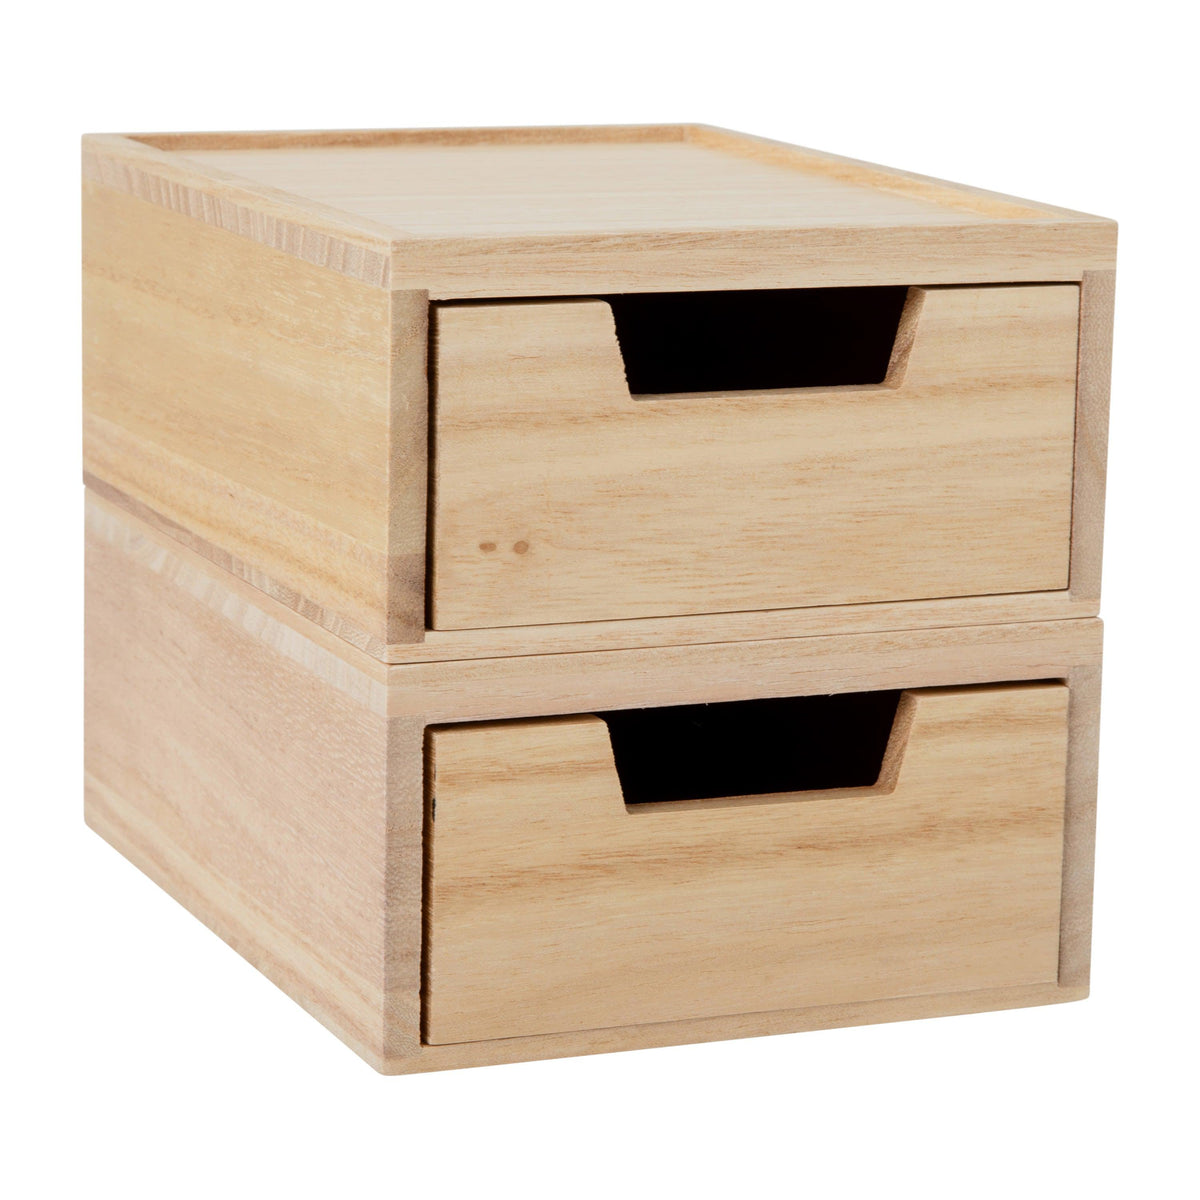 Light Natural |#| Set of 2 Paulownia Wood Storage Boxes with Pullout Drawers in Light Natural